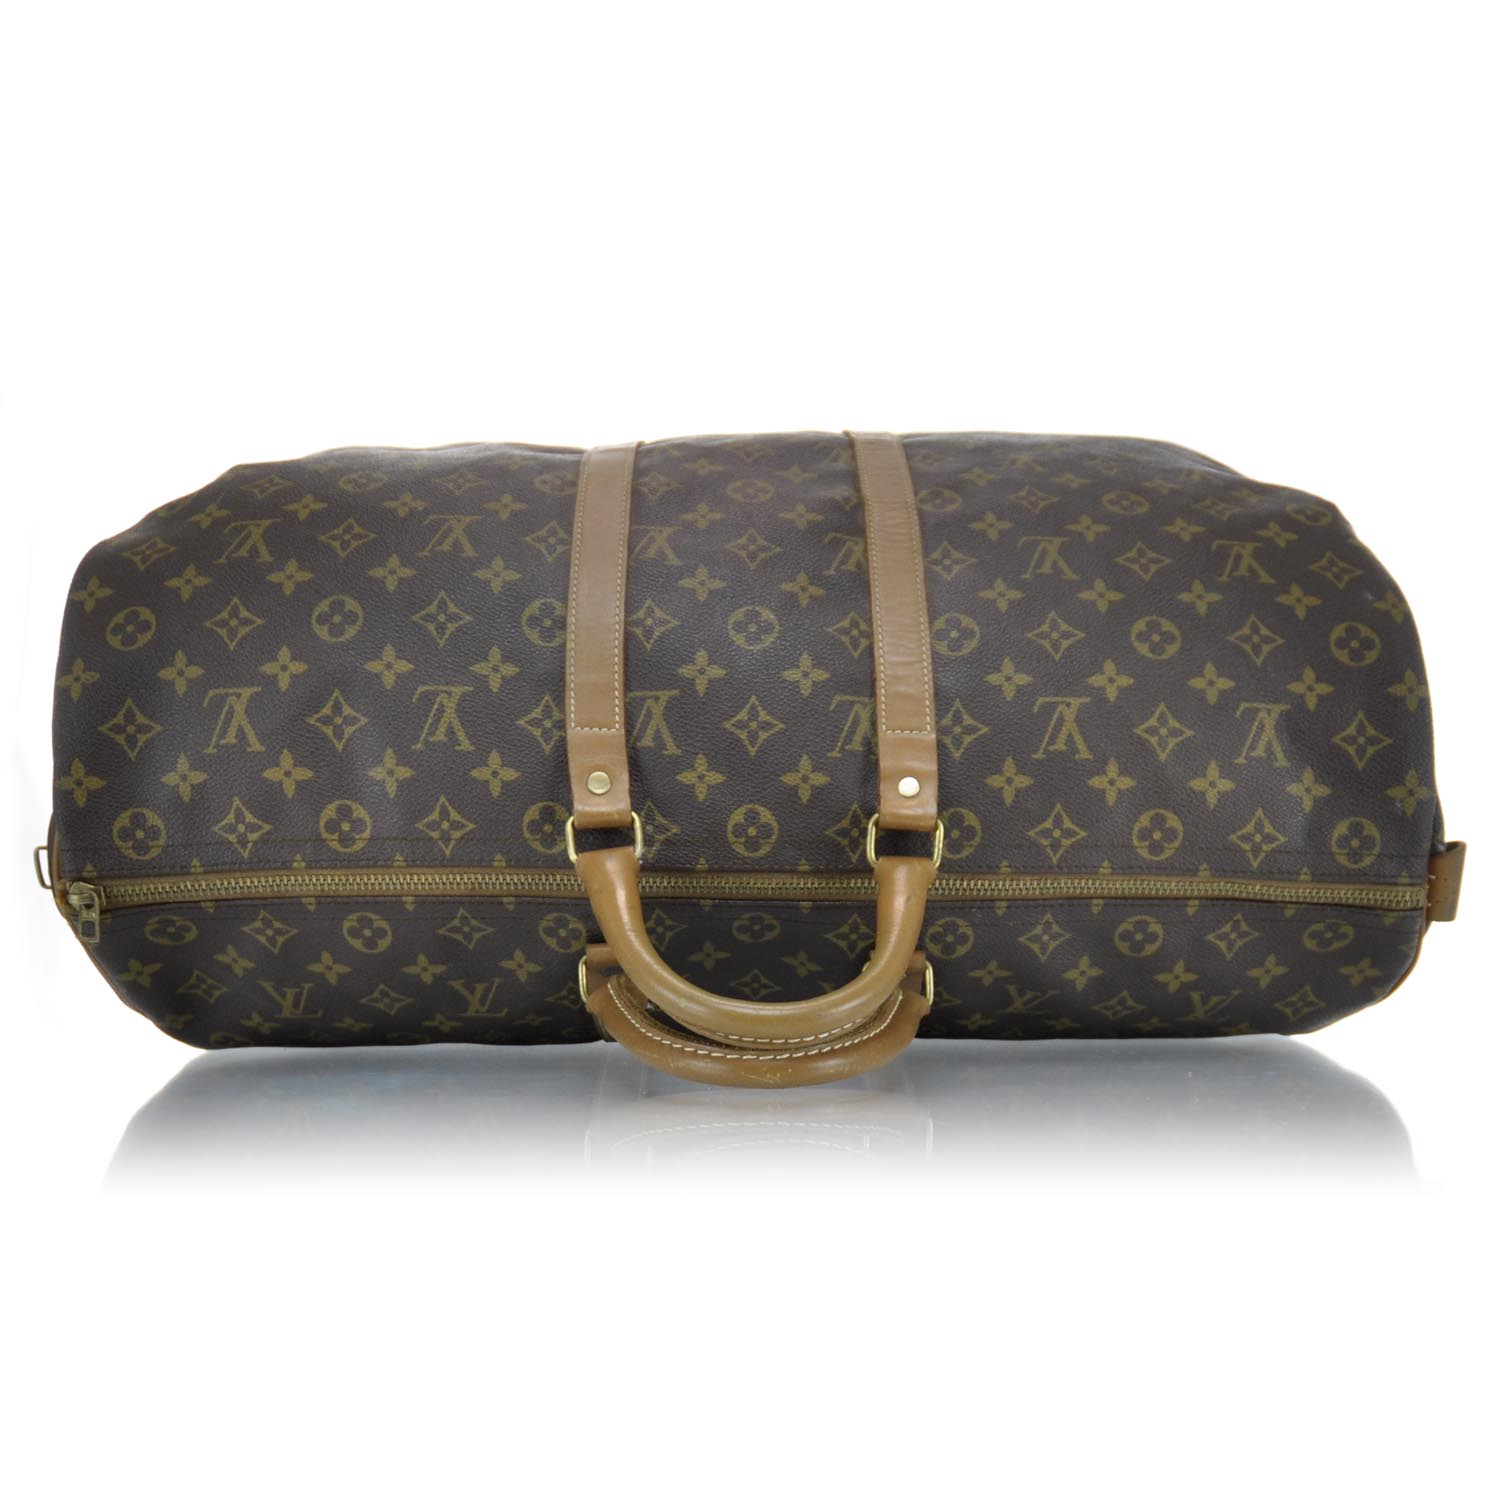 LOUIS VUITTON French Company Keepall 55 Luggage 30561